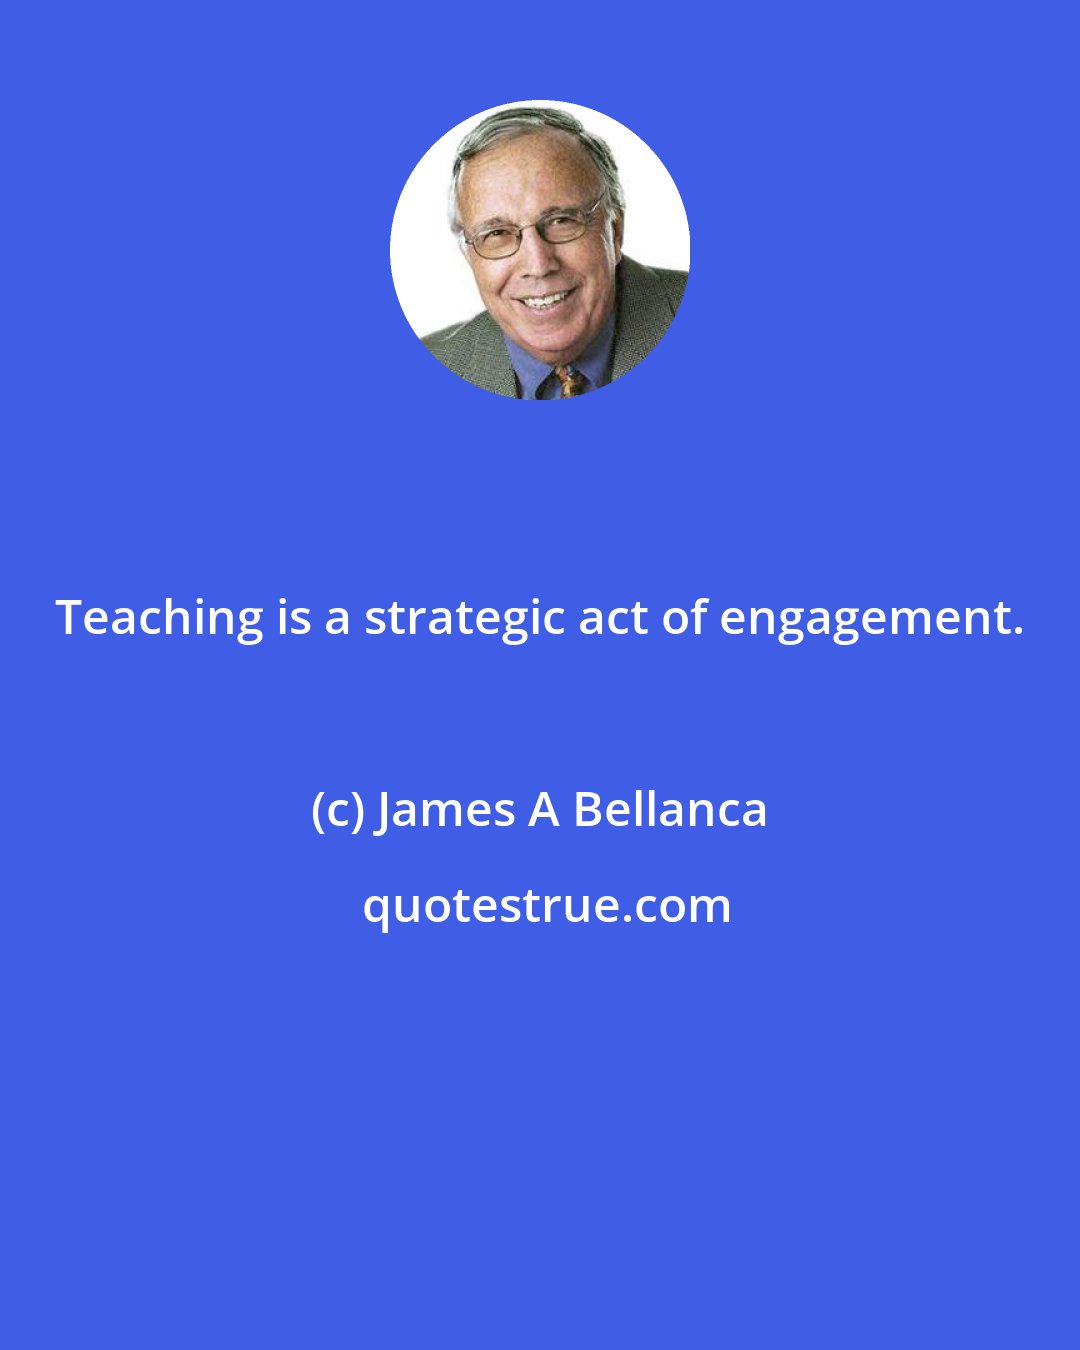 James A Bellanca: Teaching is a strategic act of engagement.